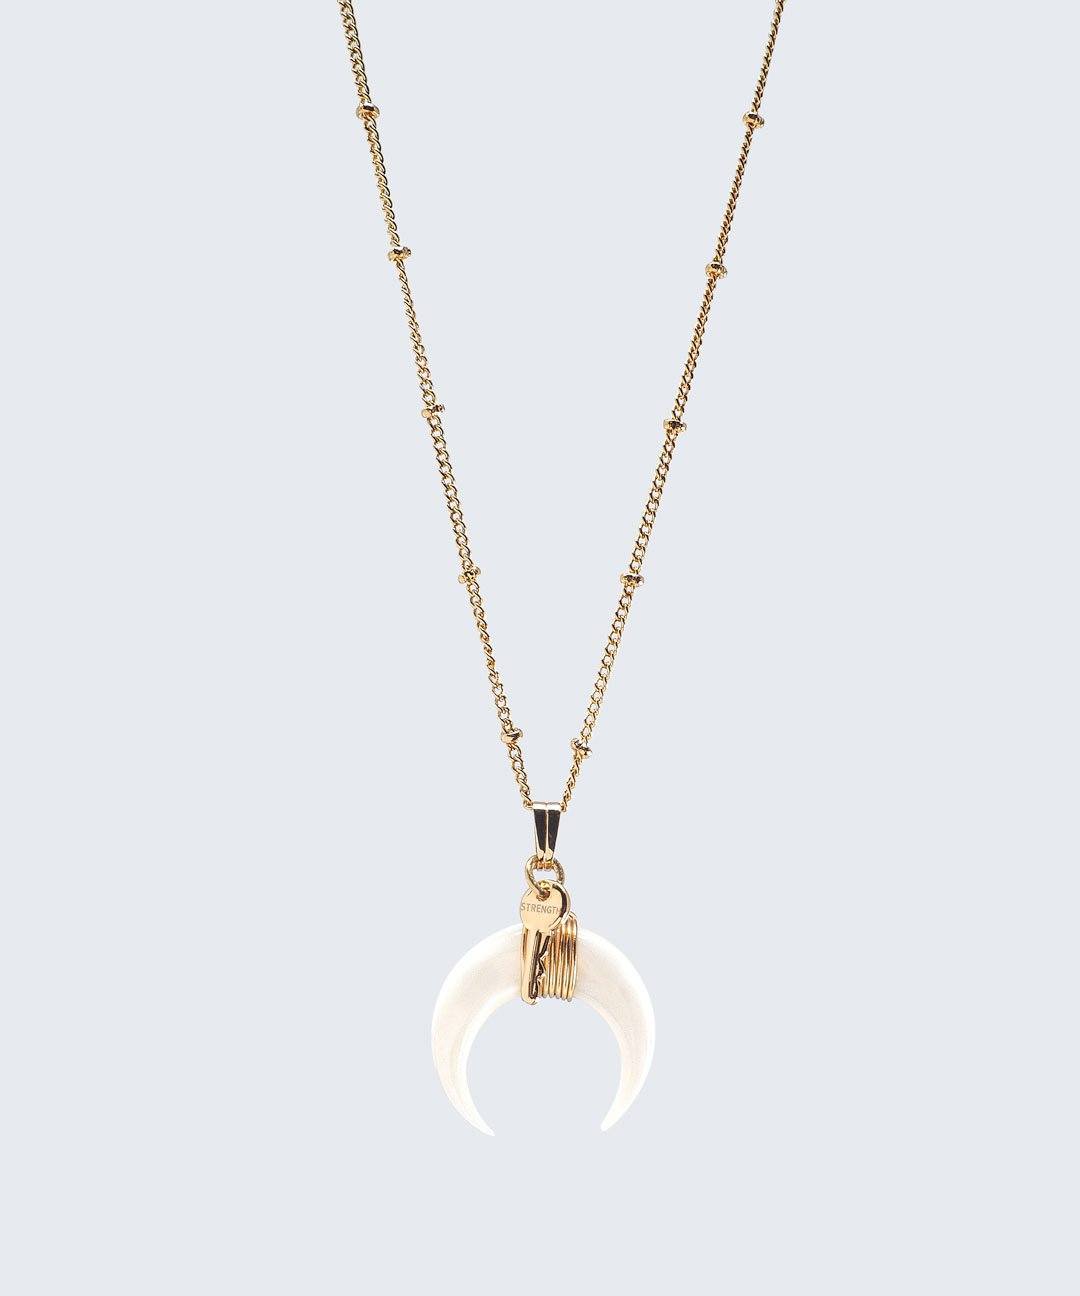 Crescent Horn Necklace Necklaces The Giving Keys GOLD STRENGTH